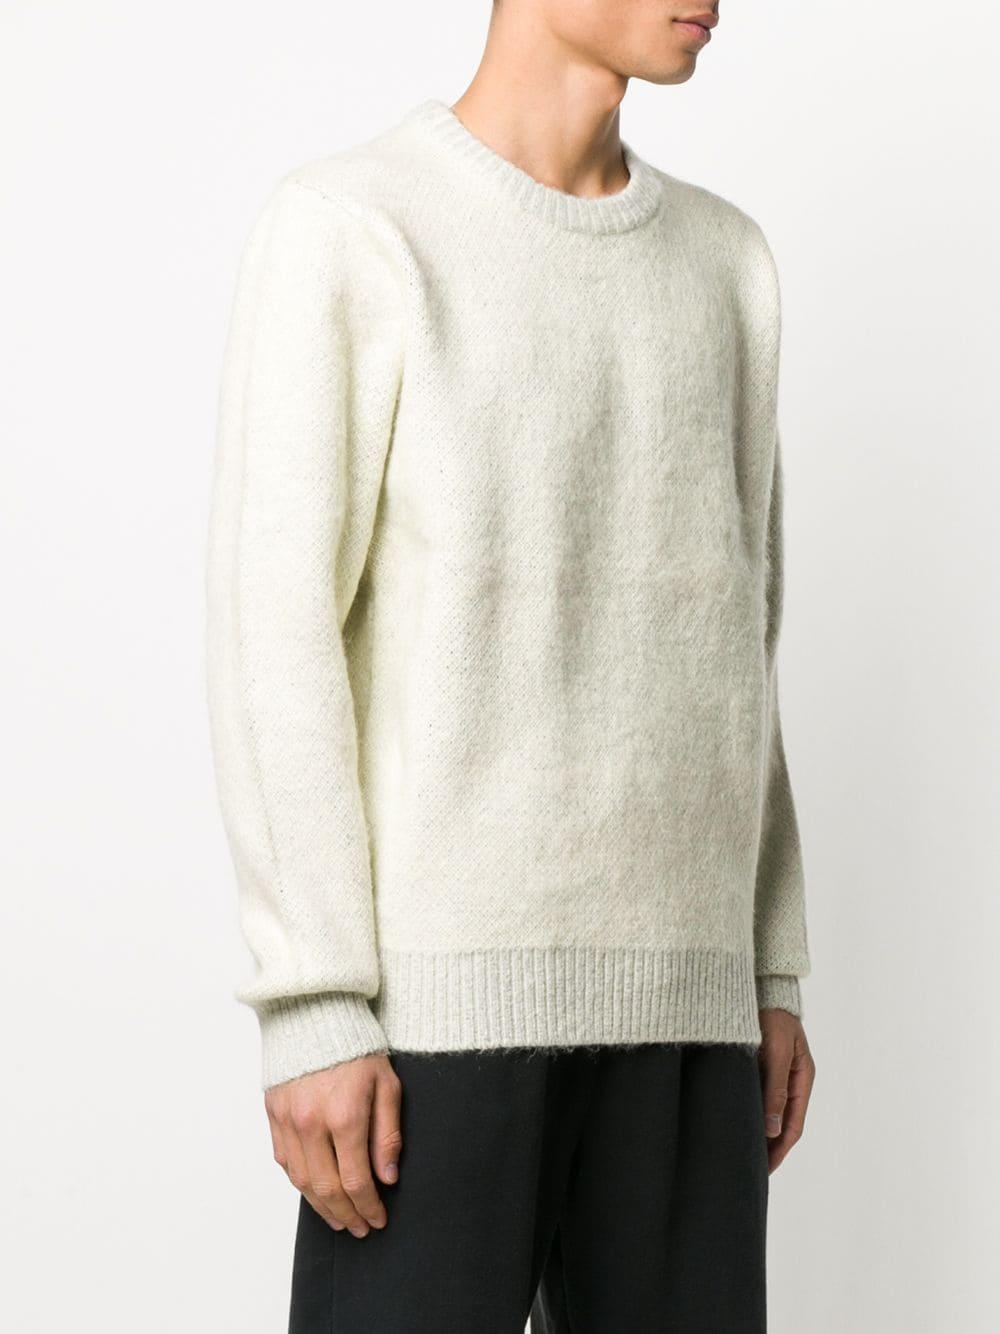 Stussy Synthetic 8 Ball Knit Jumper for Men - Lyst